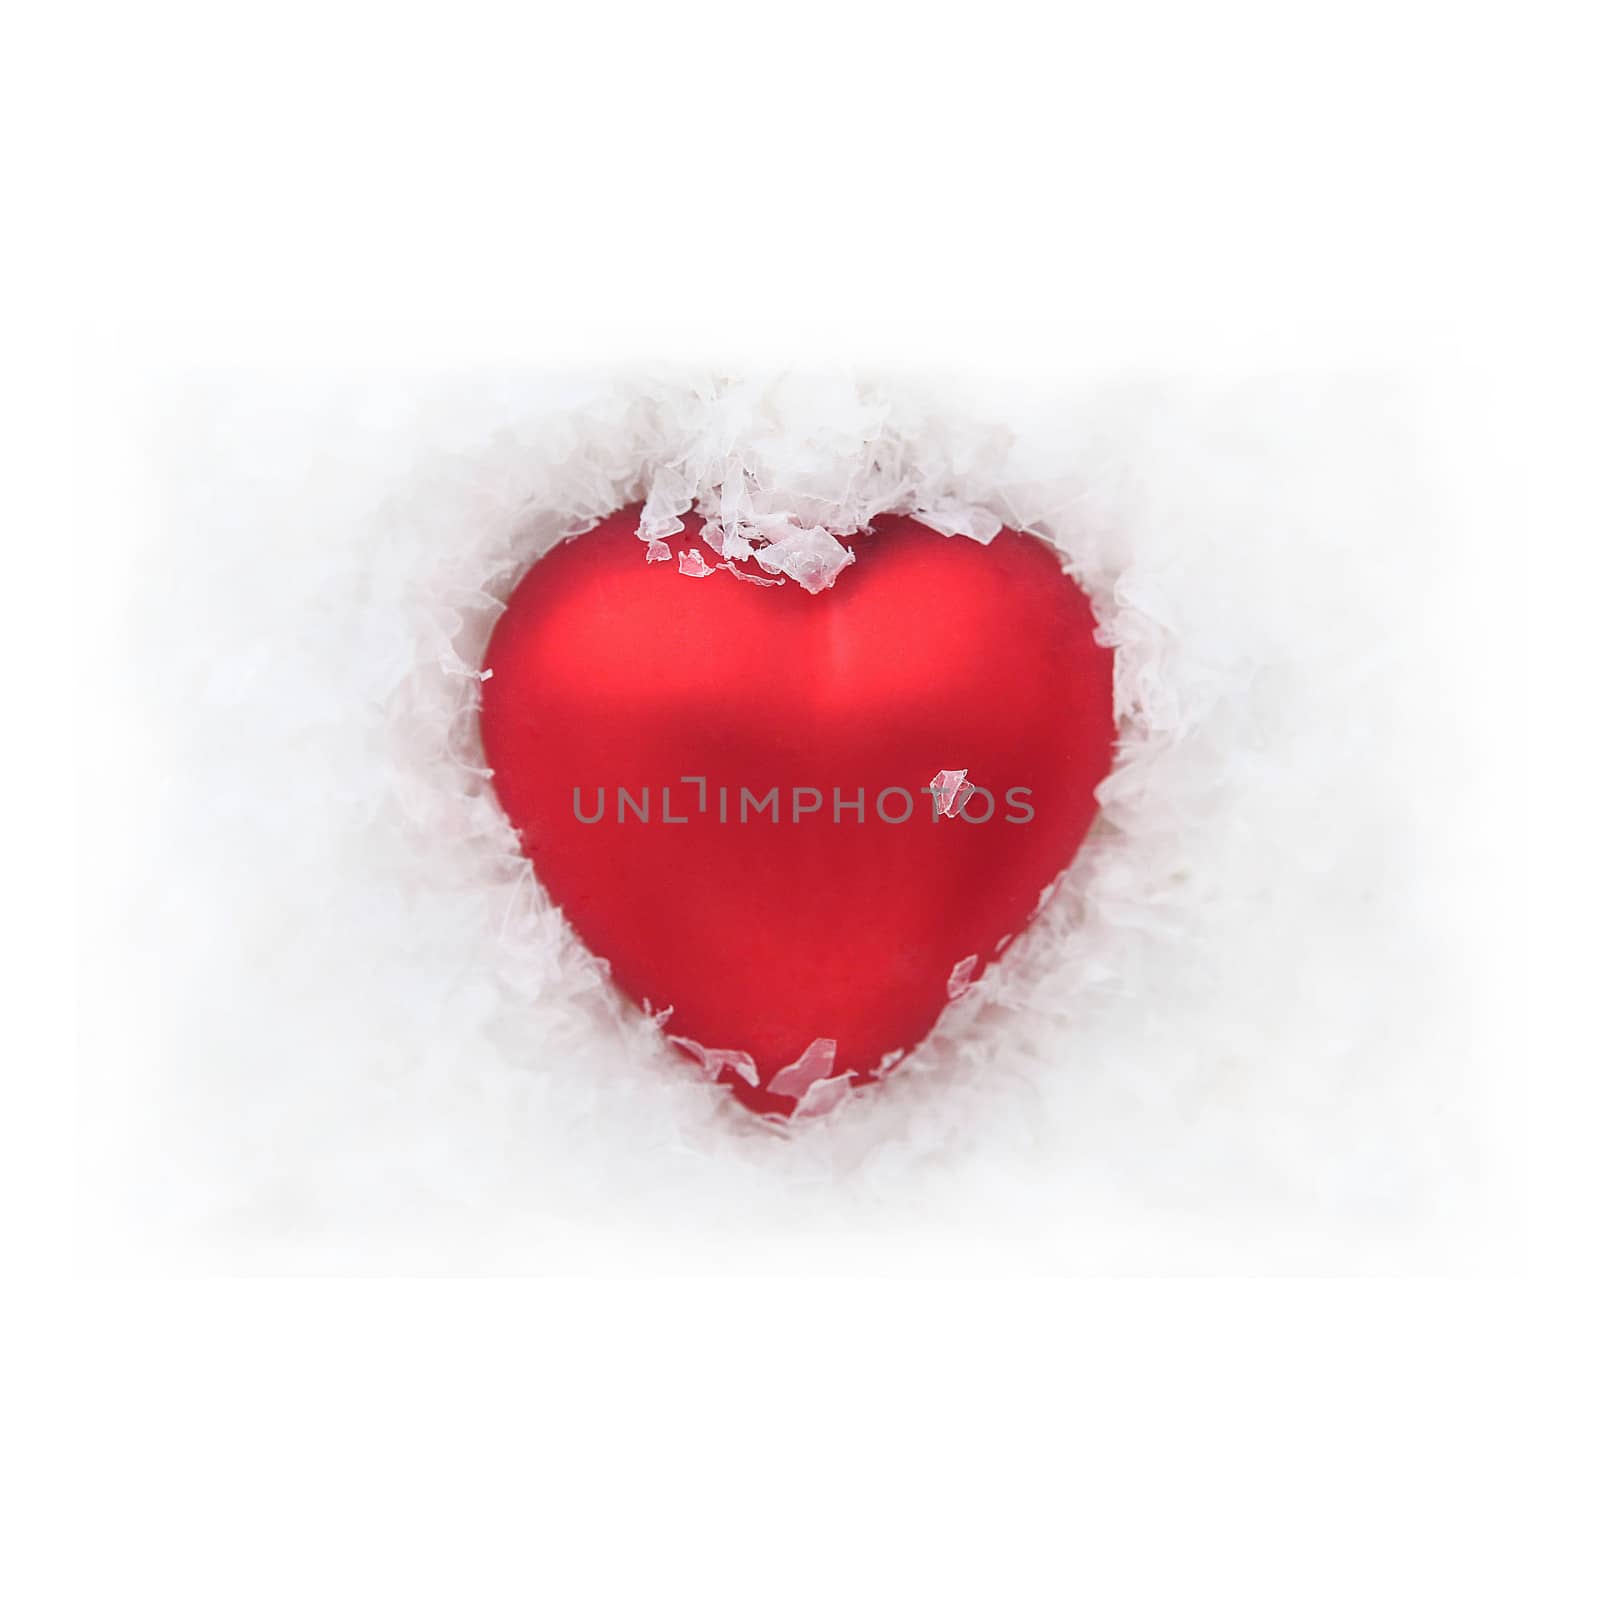  Red heart in the snow - white background 